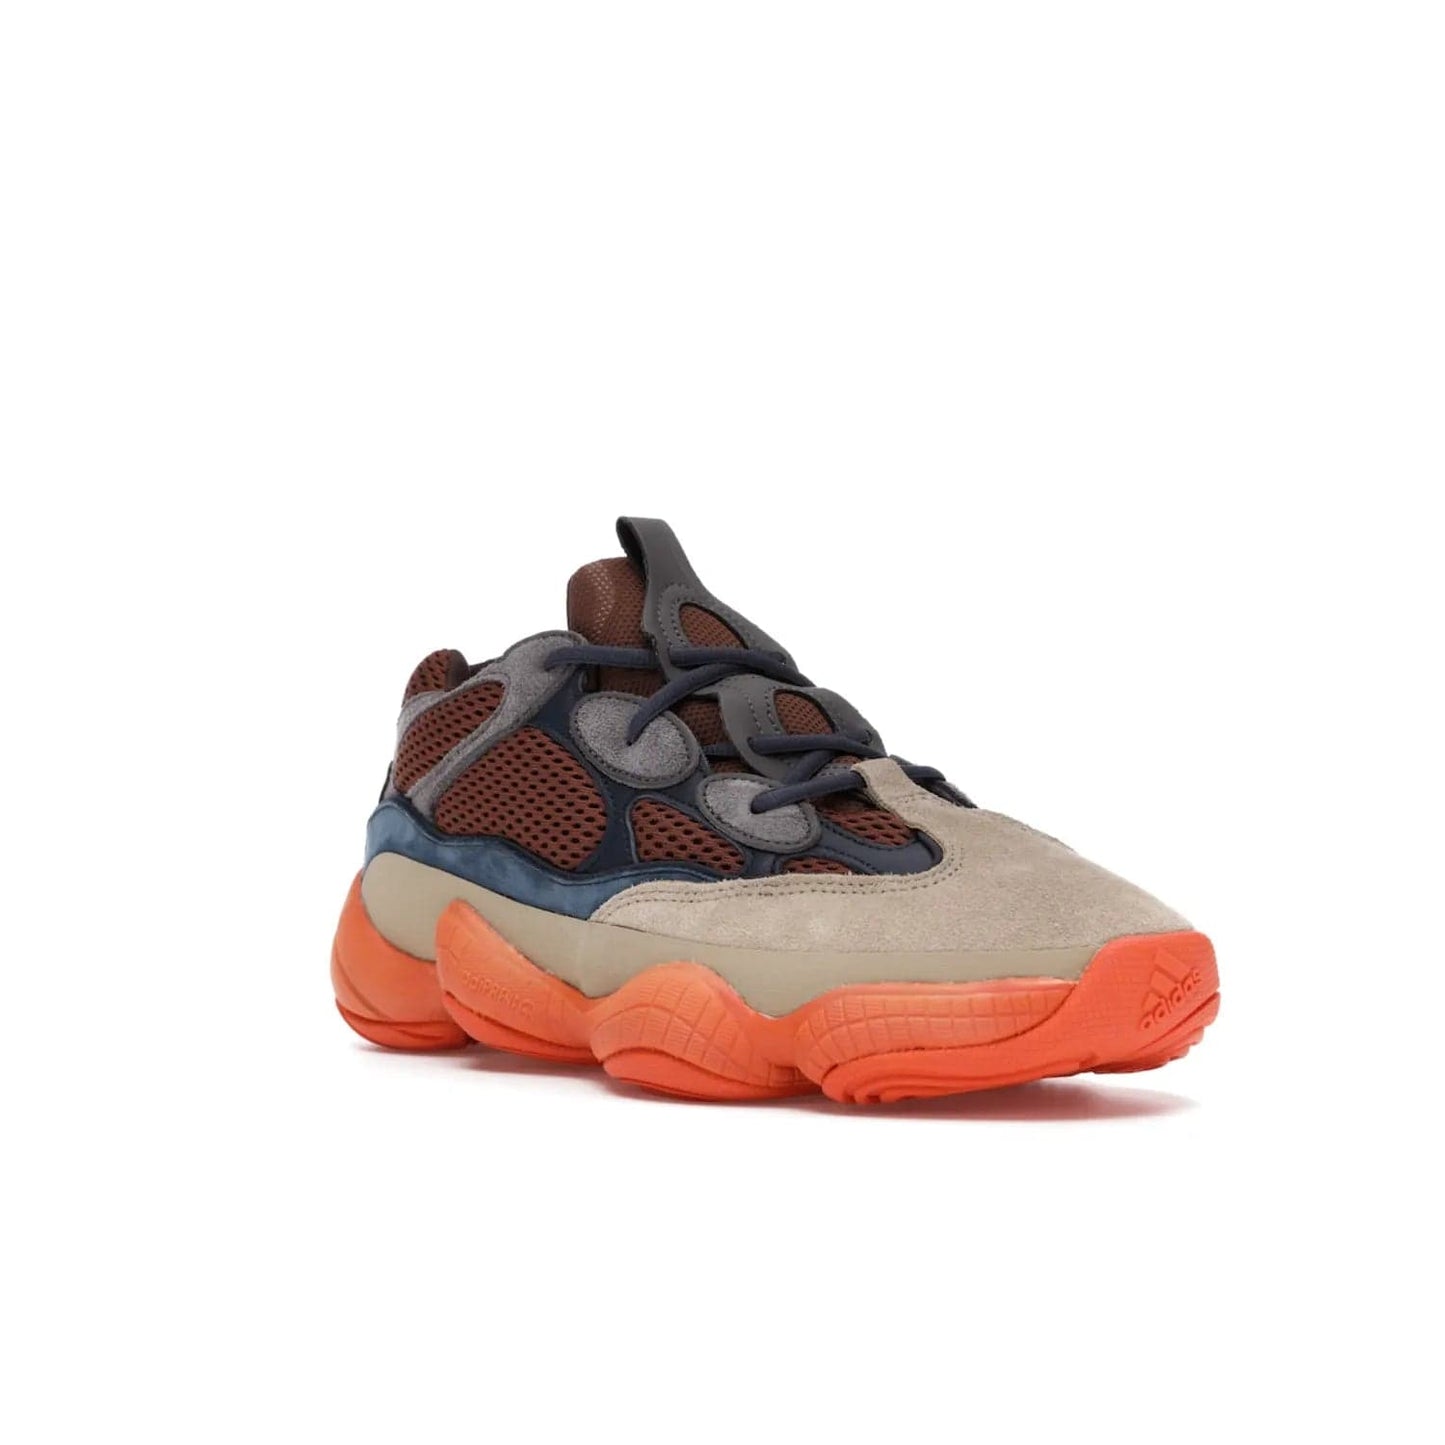 adidas Yeezy 500 Enflame - Image 6 - Only at www.BallersClubKickz.com - Step into style with the adidas Yeezy 500 Enflame. Mix of mesh, leather, and suede layered together to create tonal-brown, dark blue, & orange. Orange AdiPRENE sole provides superior cushioning & comfort. Get yours and experience maximum style.